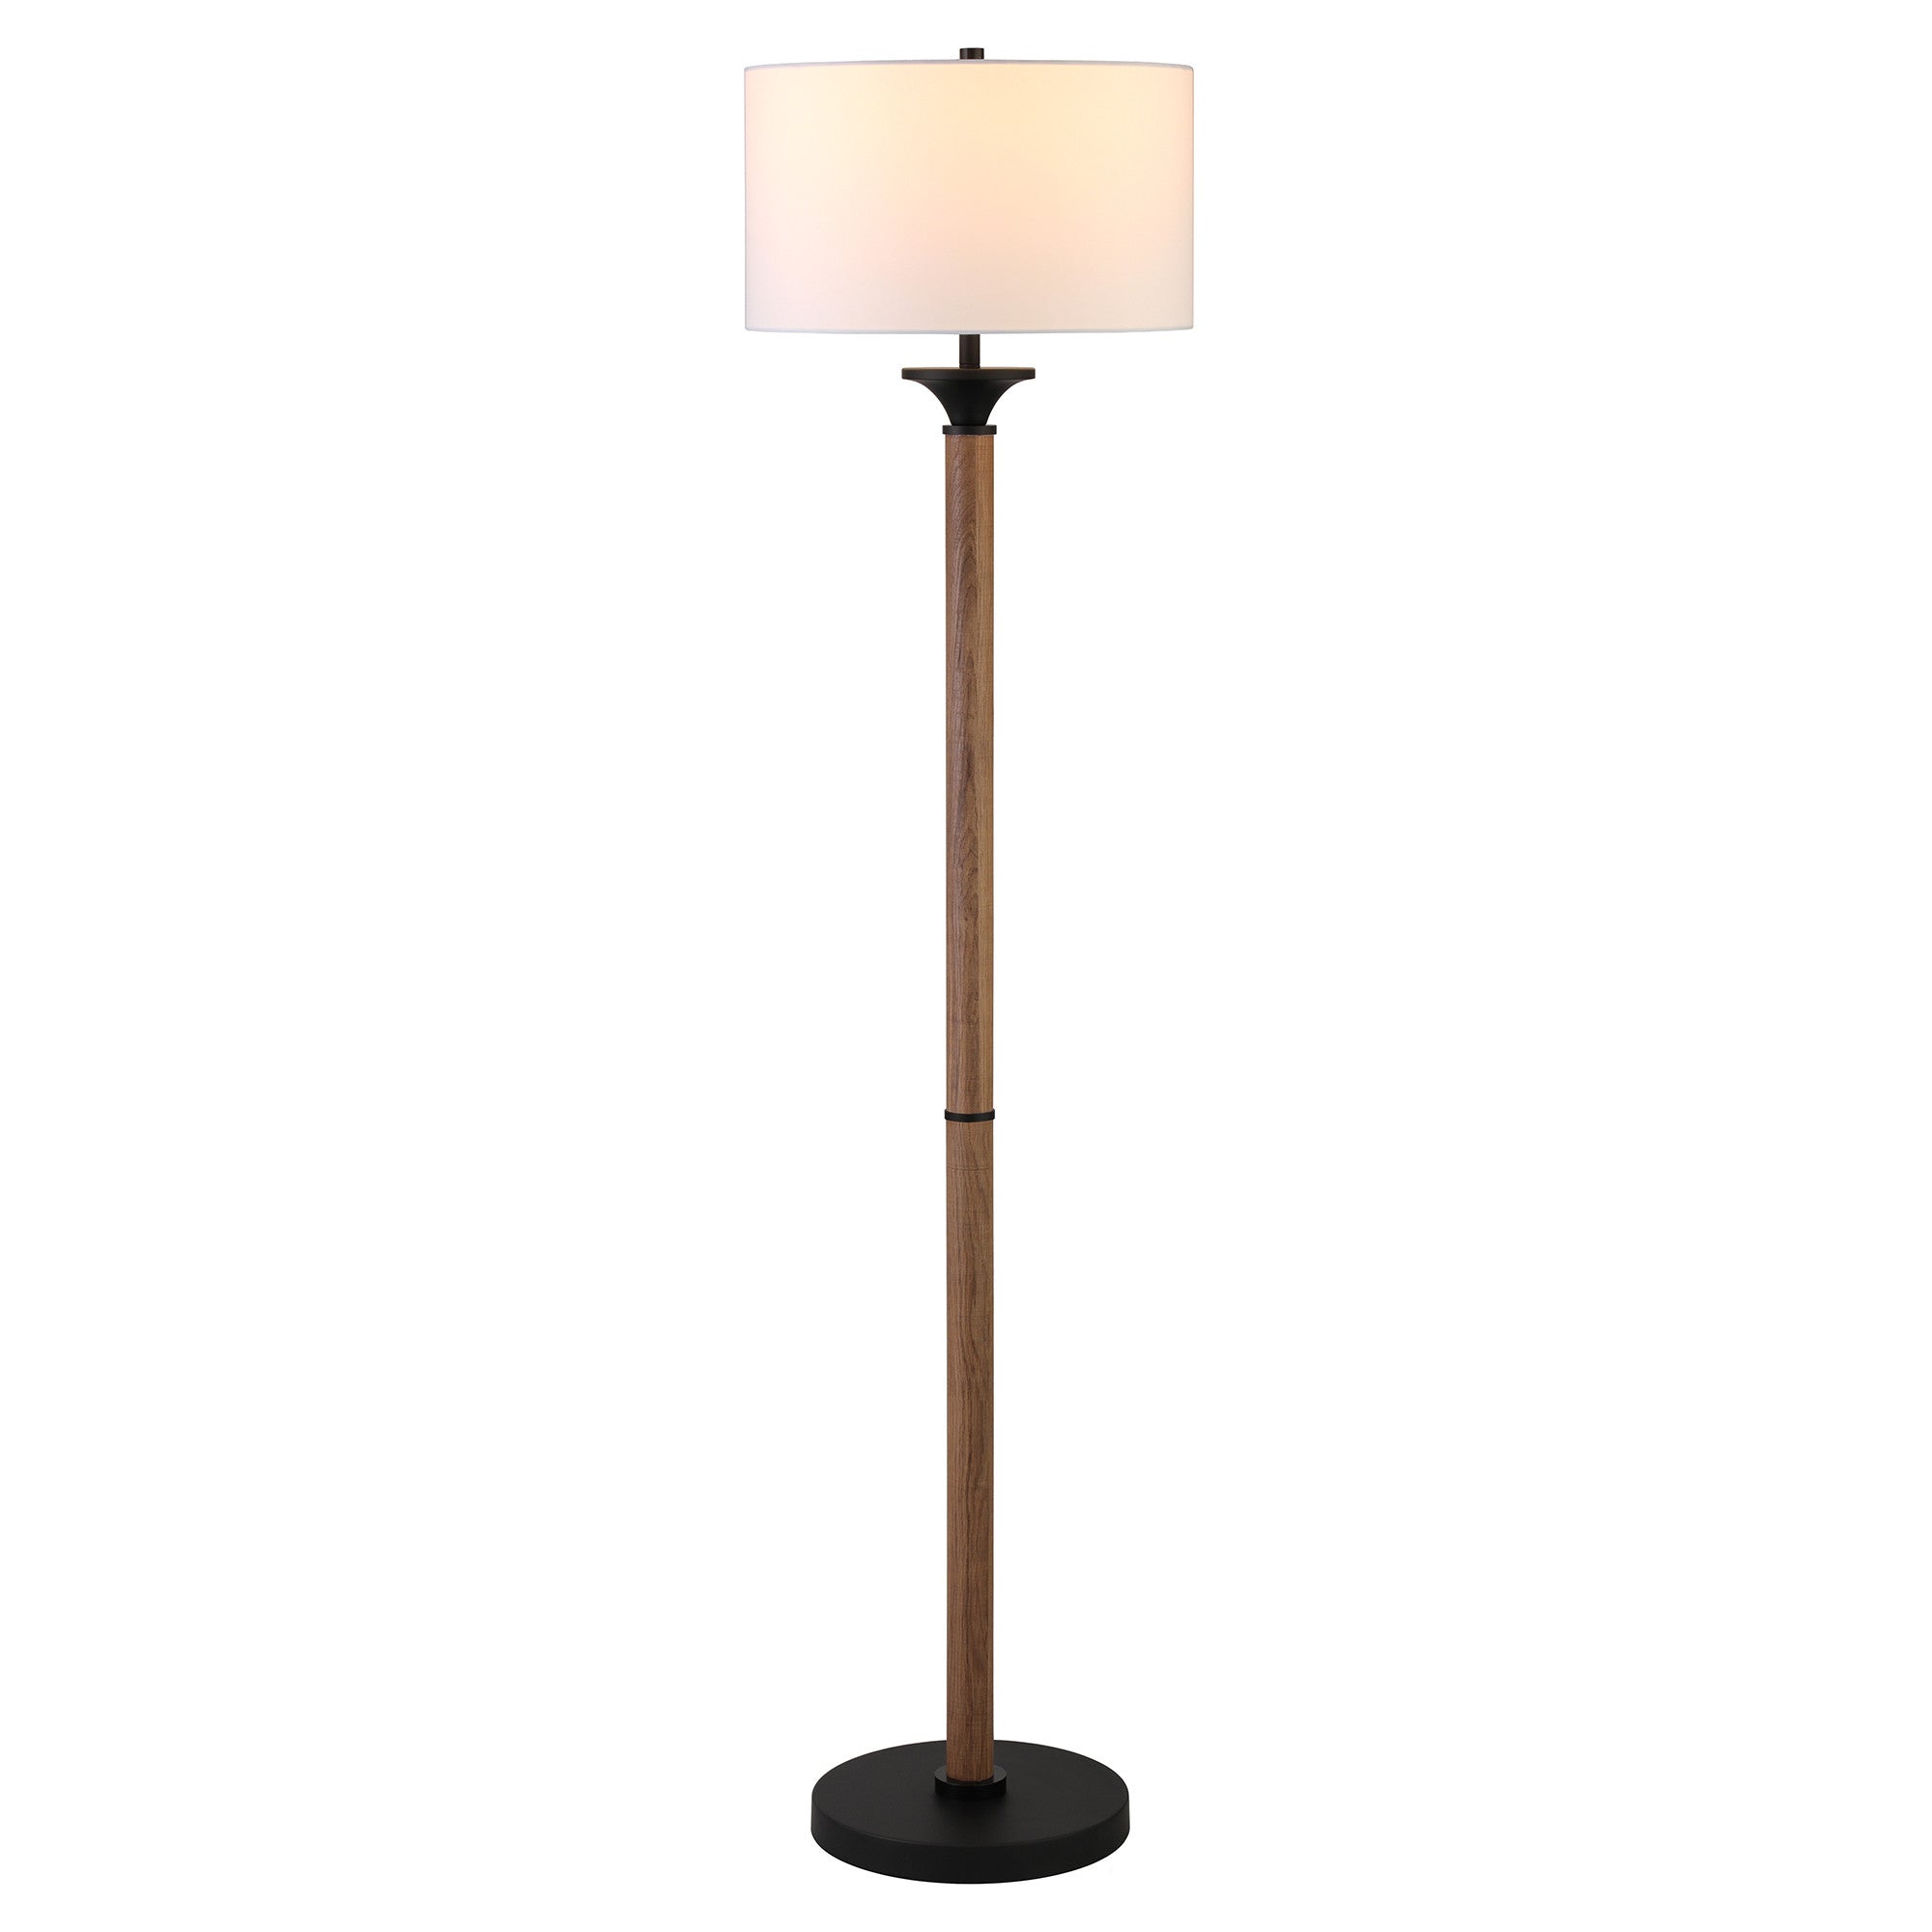 66" Black Traditional Shaped Floor Lamp With White Drum Shade